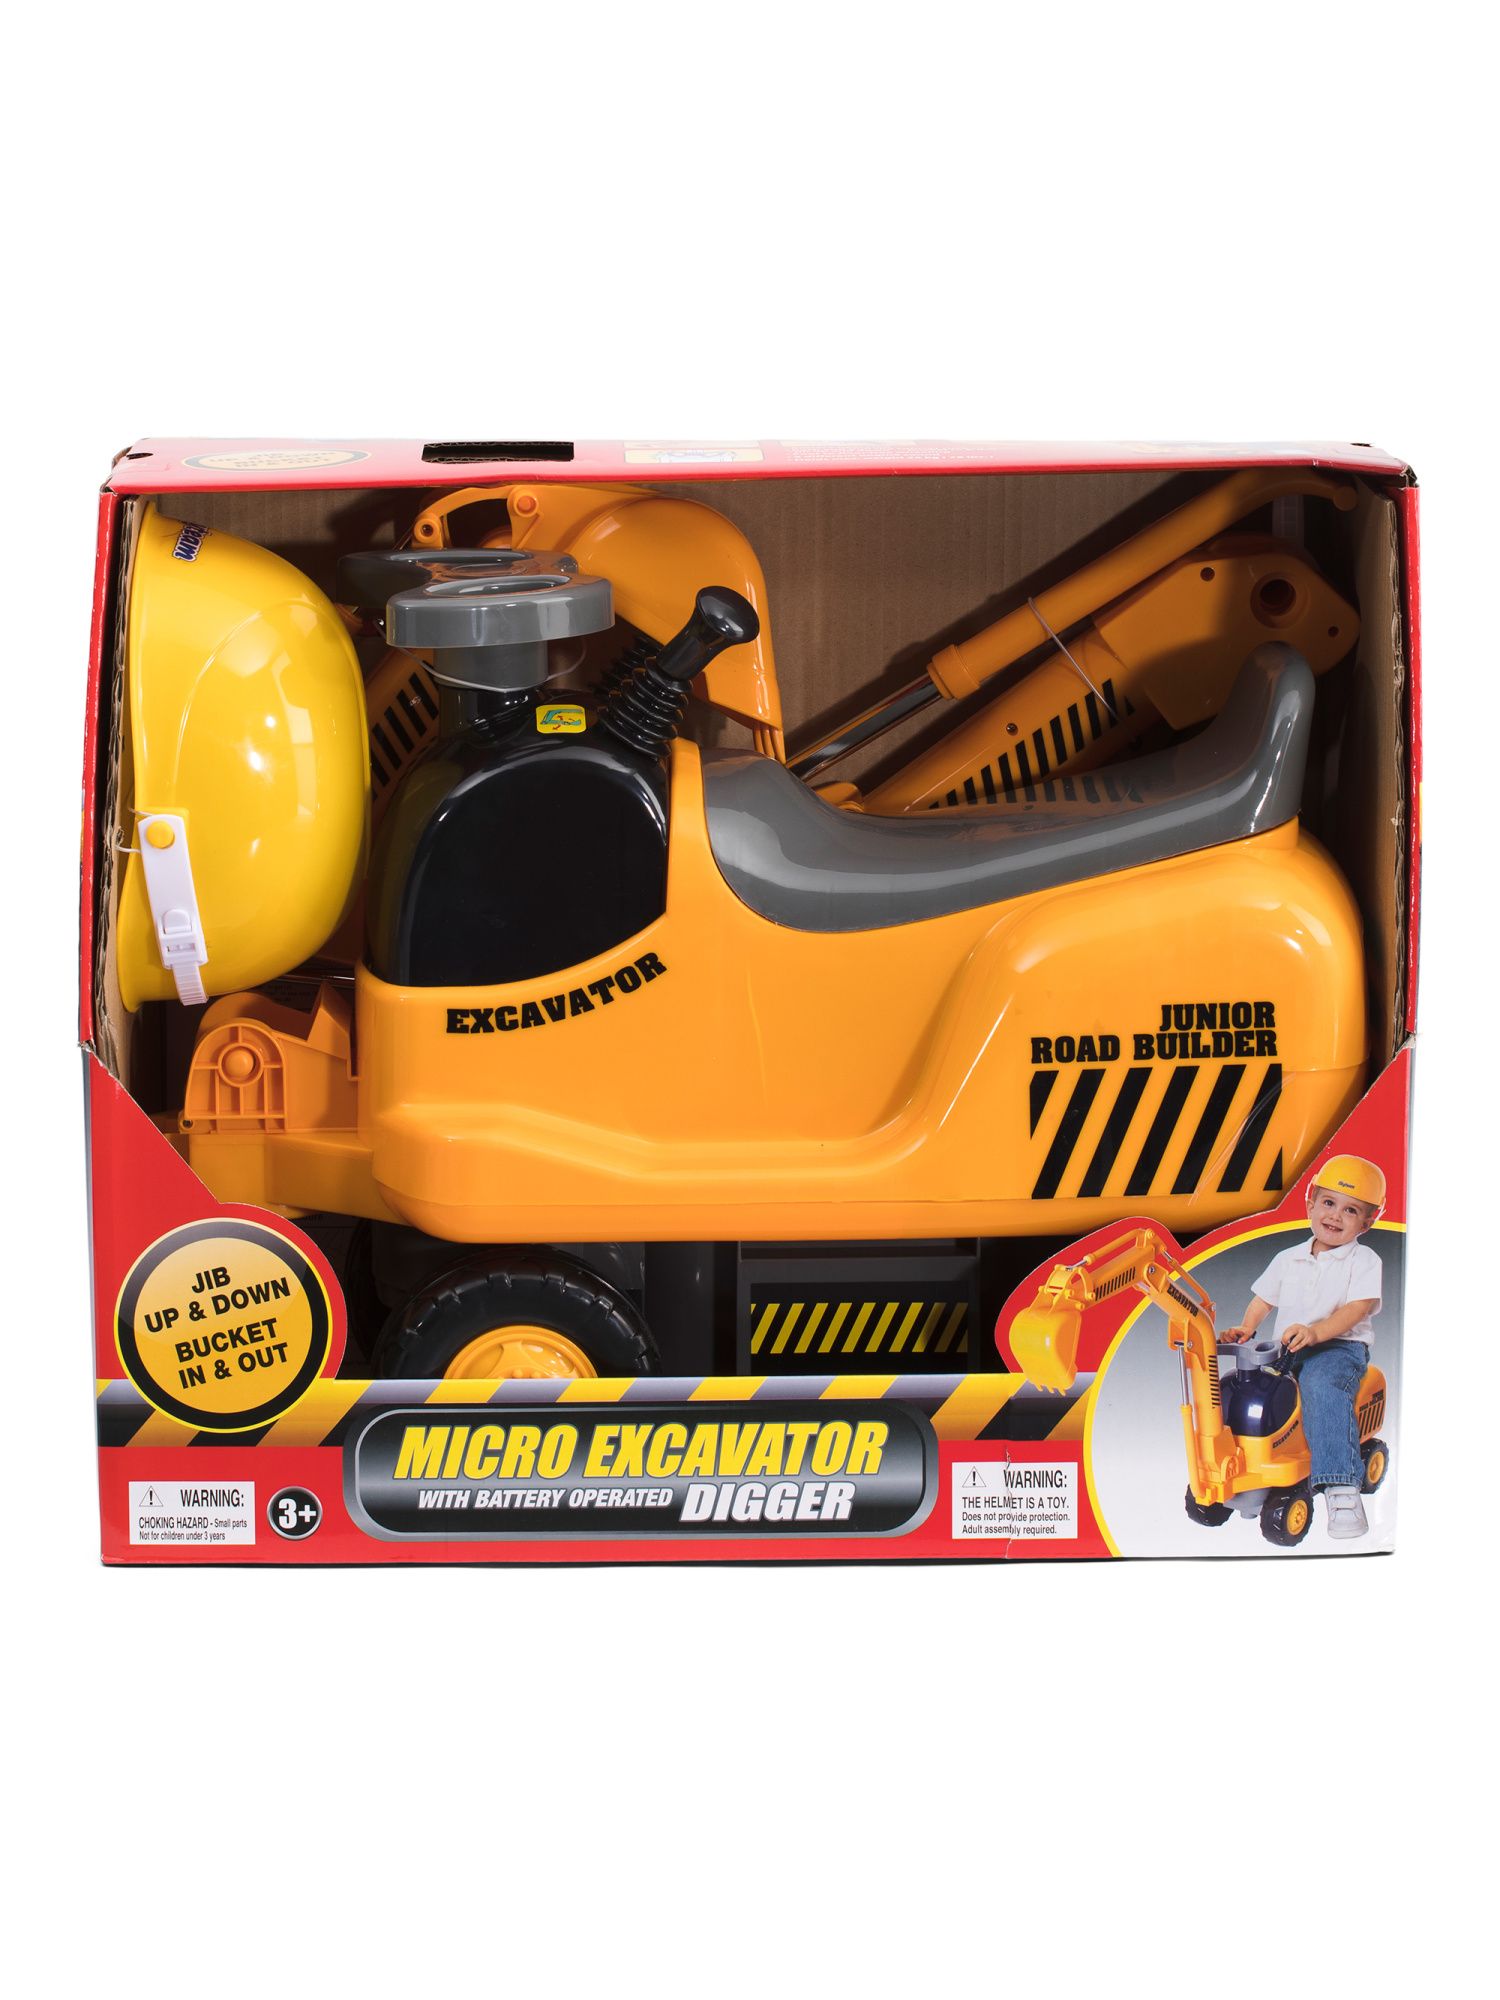 Micro Excavator Ride-on With Battery Operated Digger | TJ Maxx